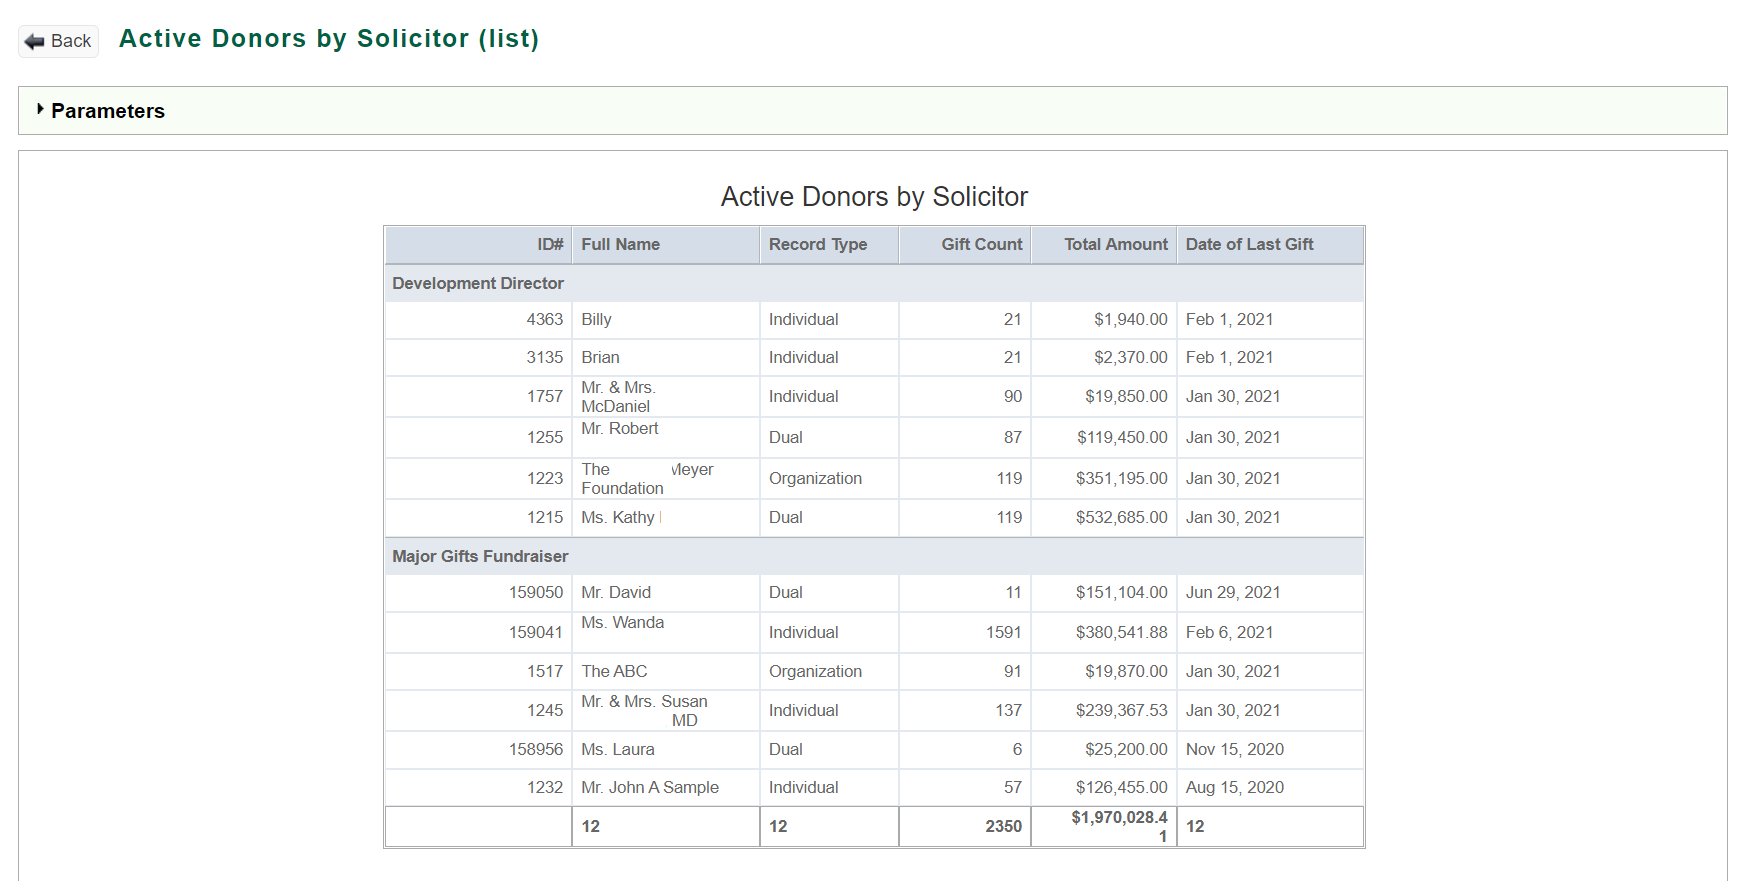 Active Donors by Solicitor list